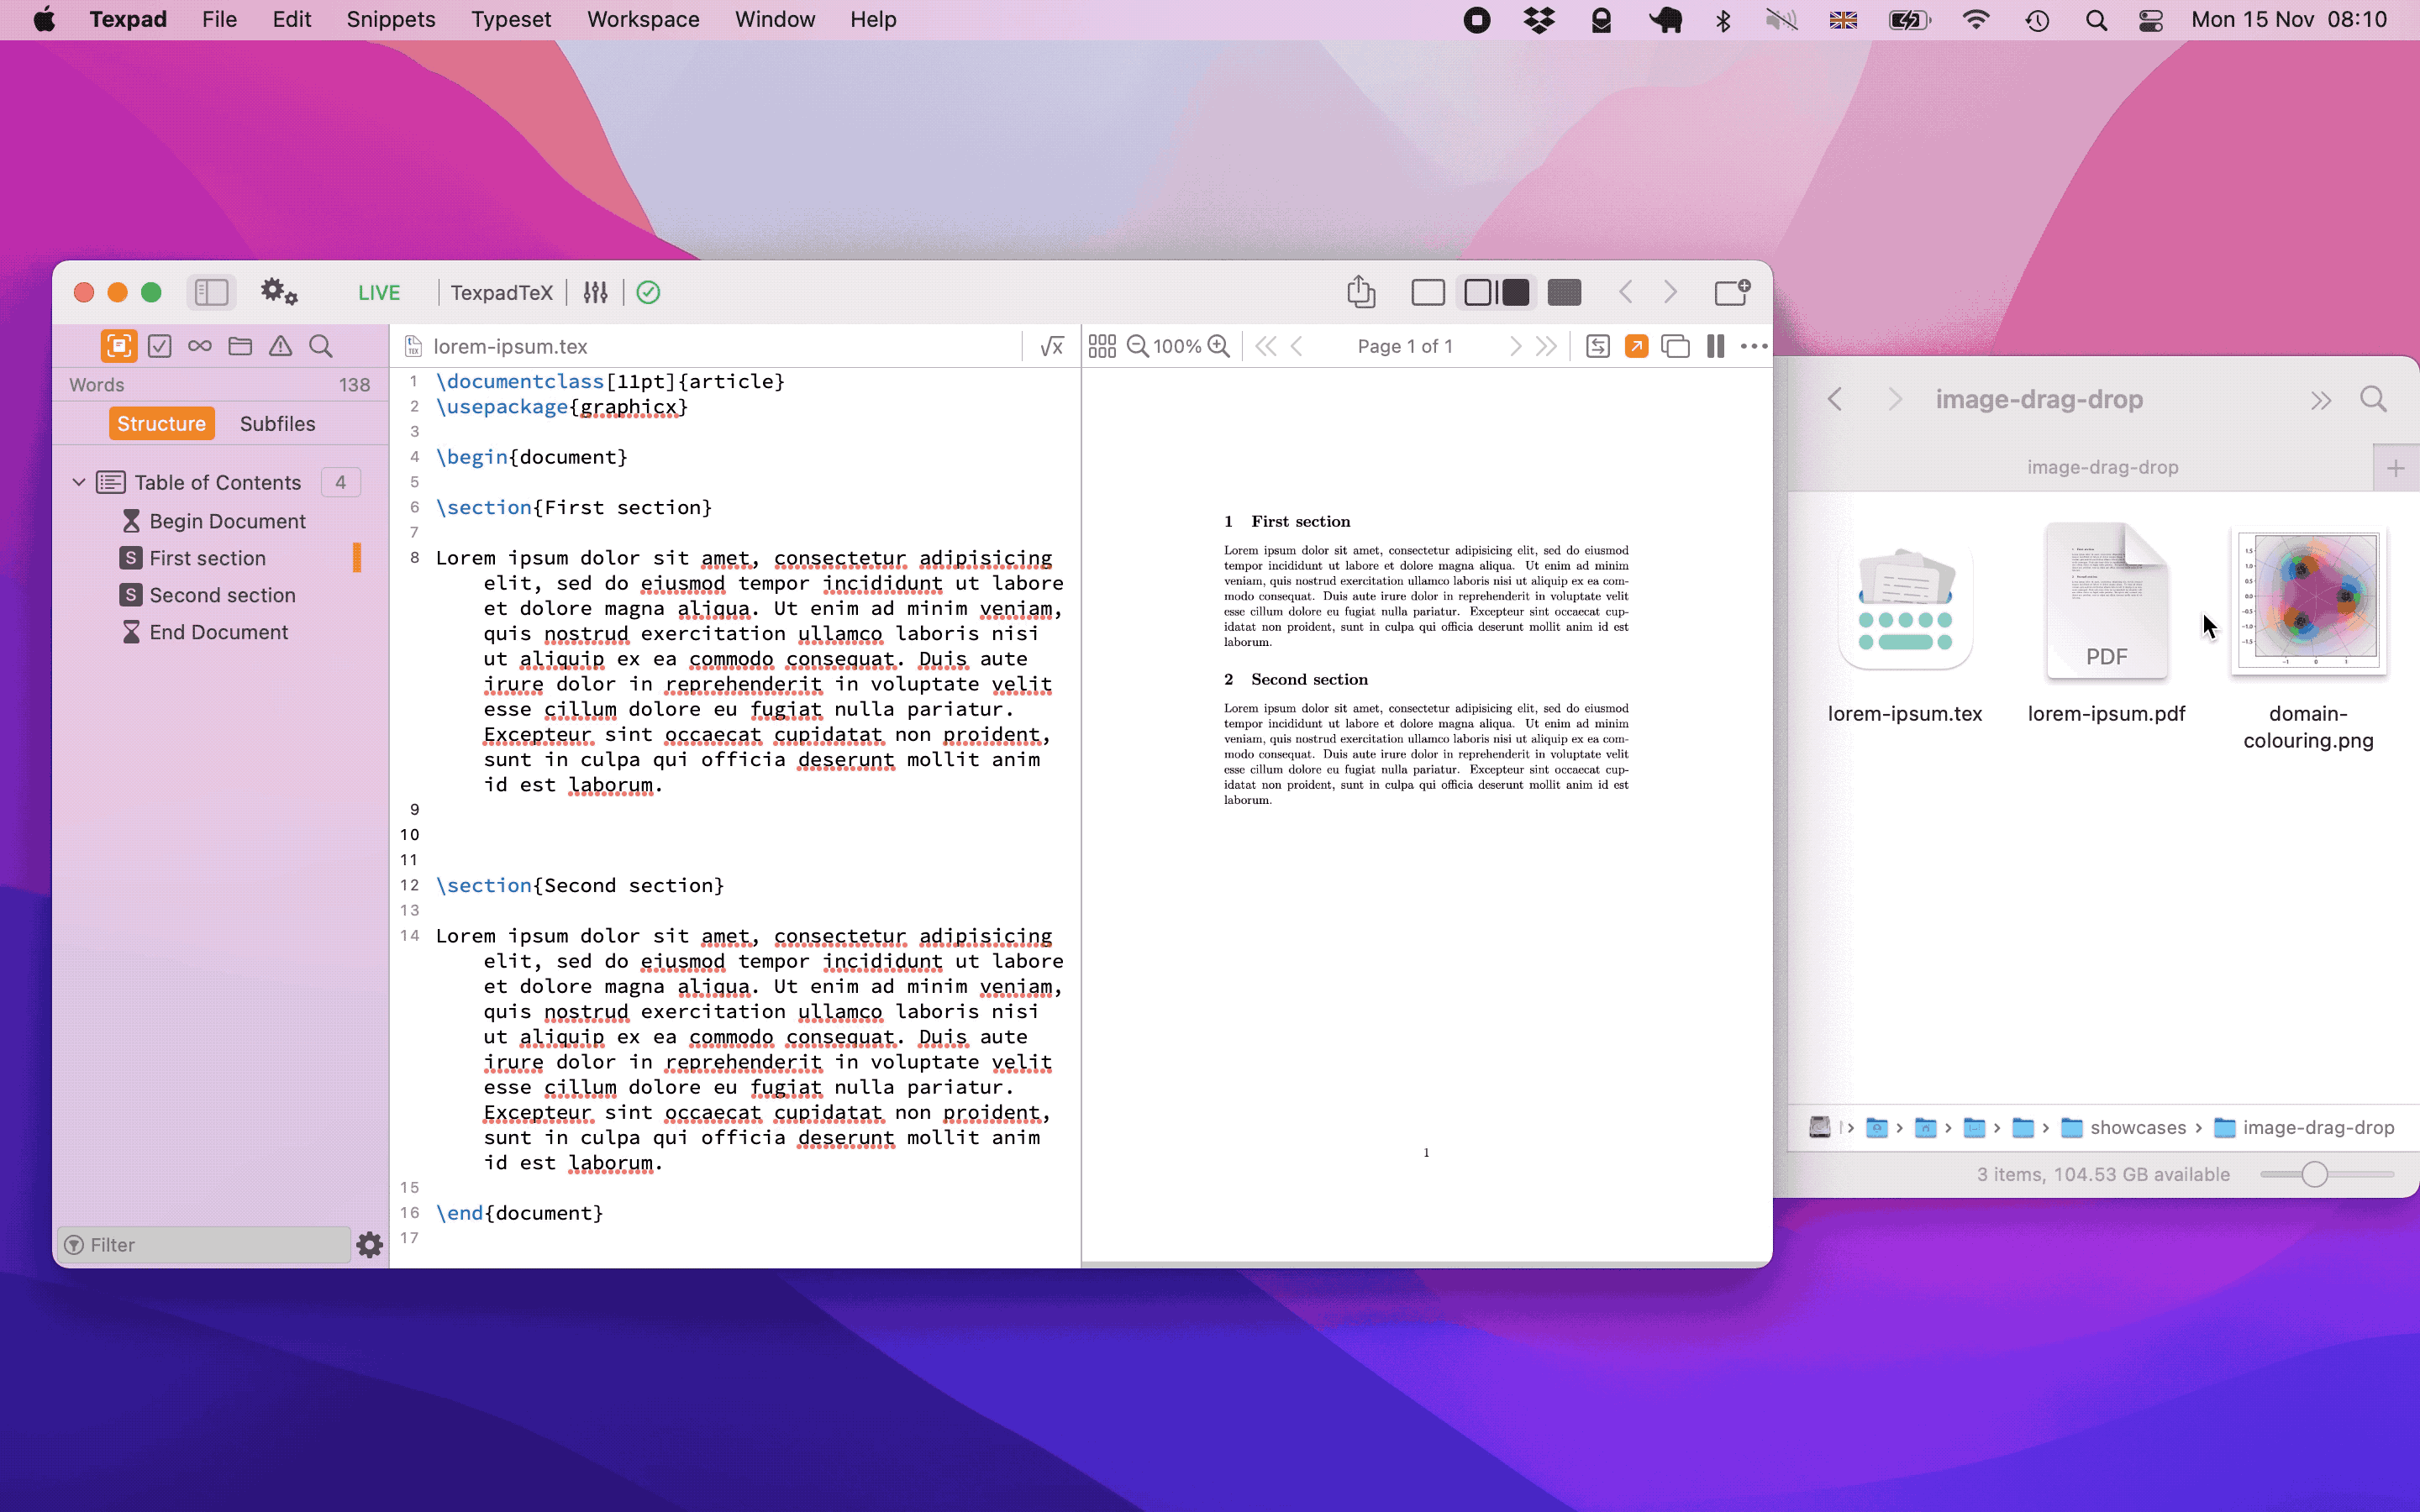 docs/apps/workspace/typesetting/images/drag-drop-image_macos.gif